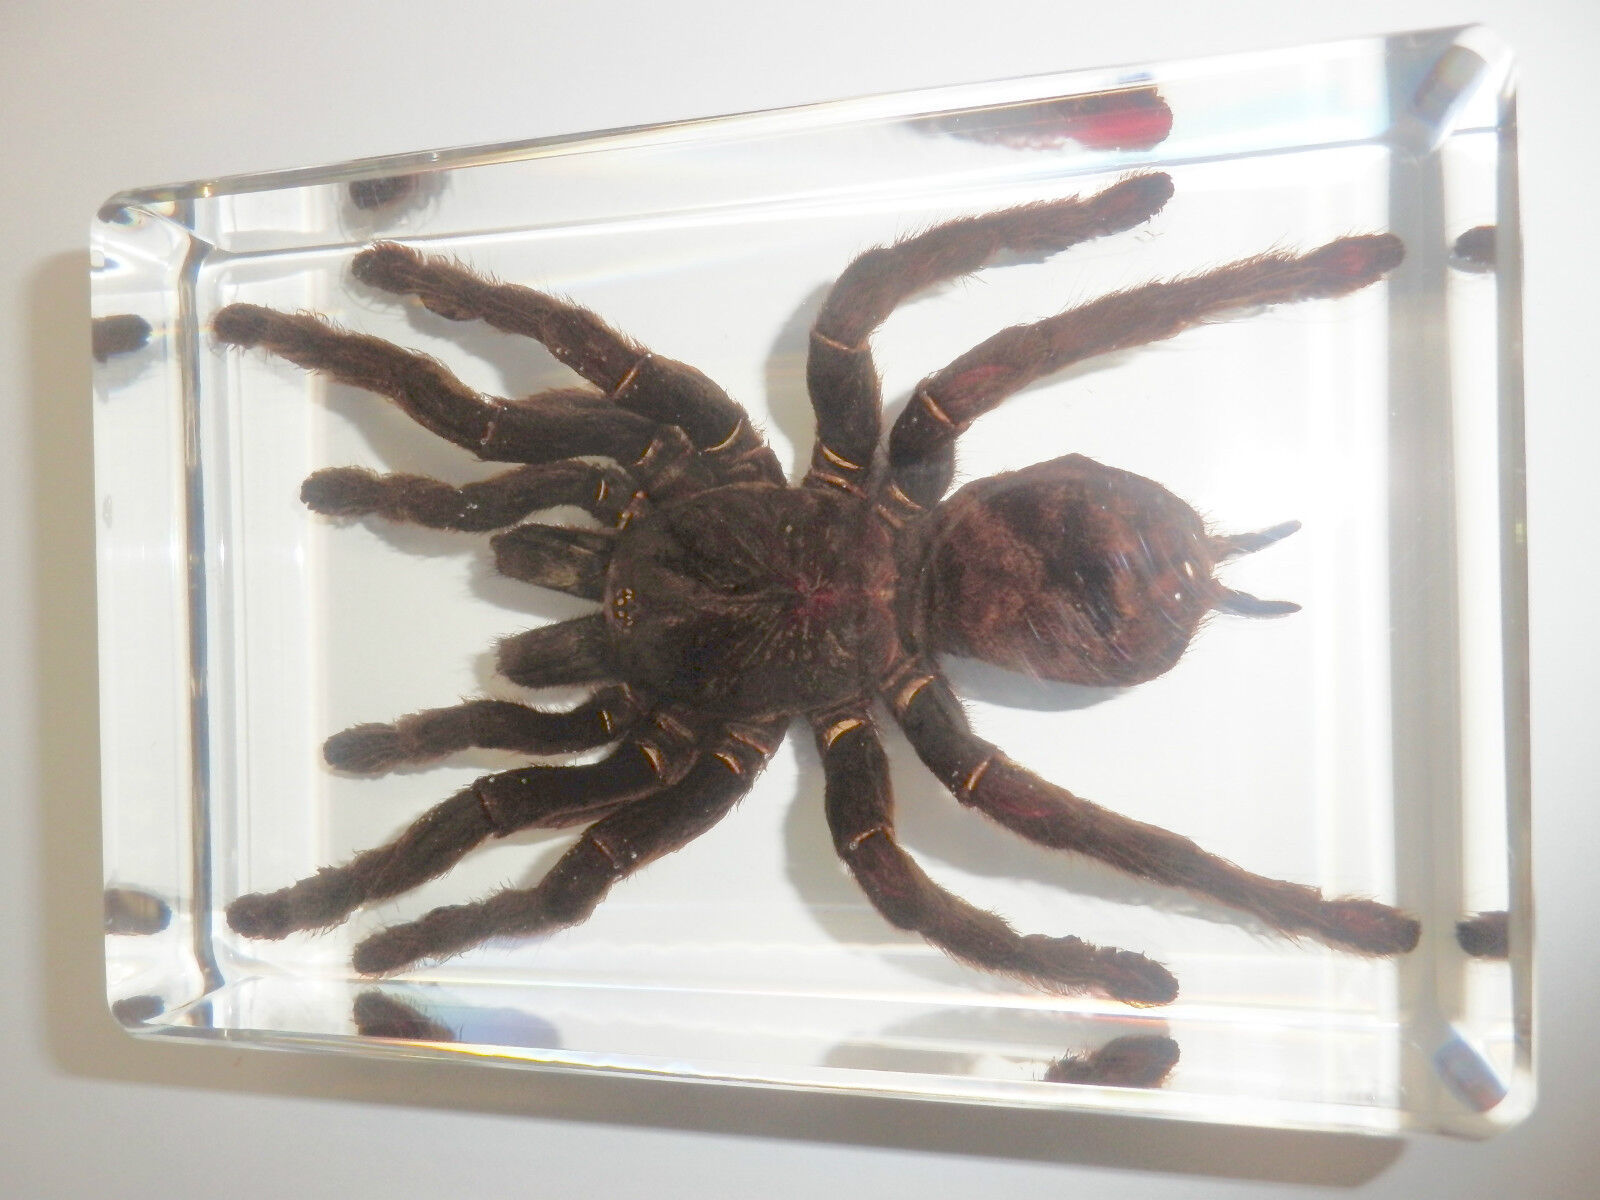 Giant Tarantula Spider Golden Earth Tiger Real Insect Specimen Education Aid